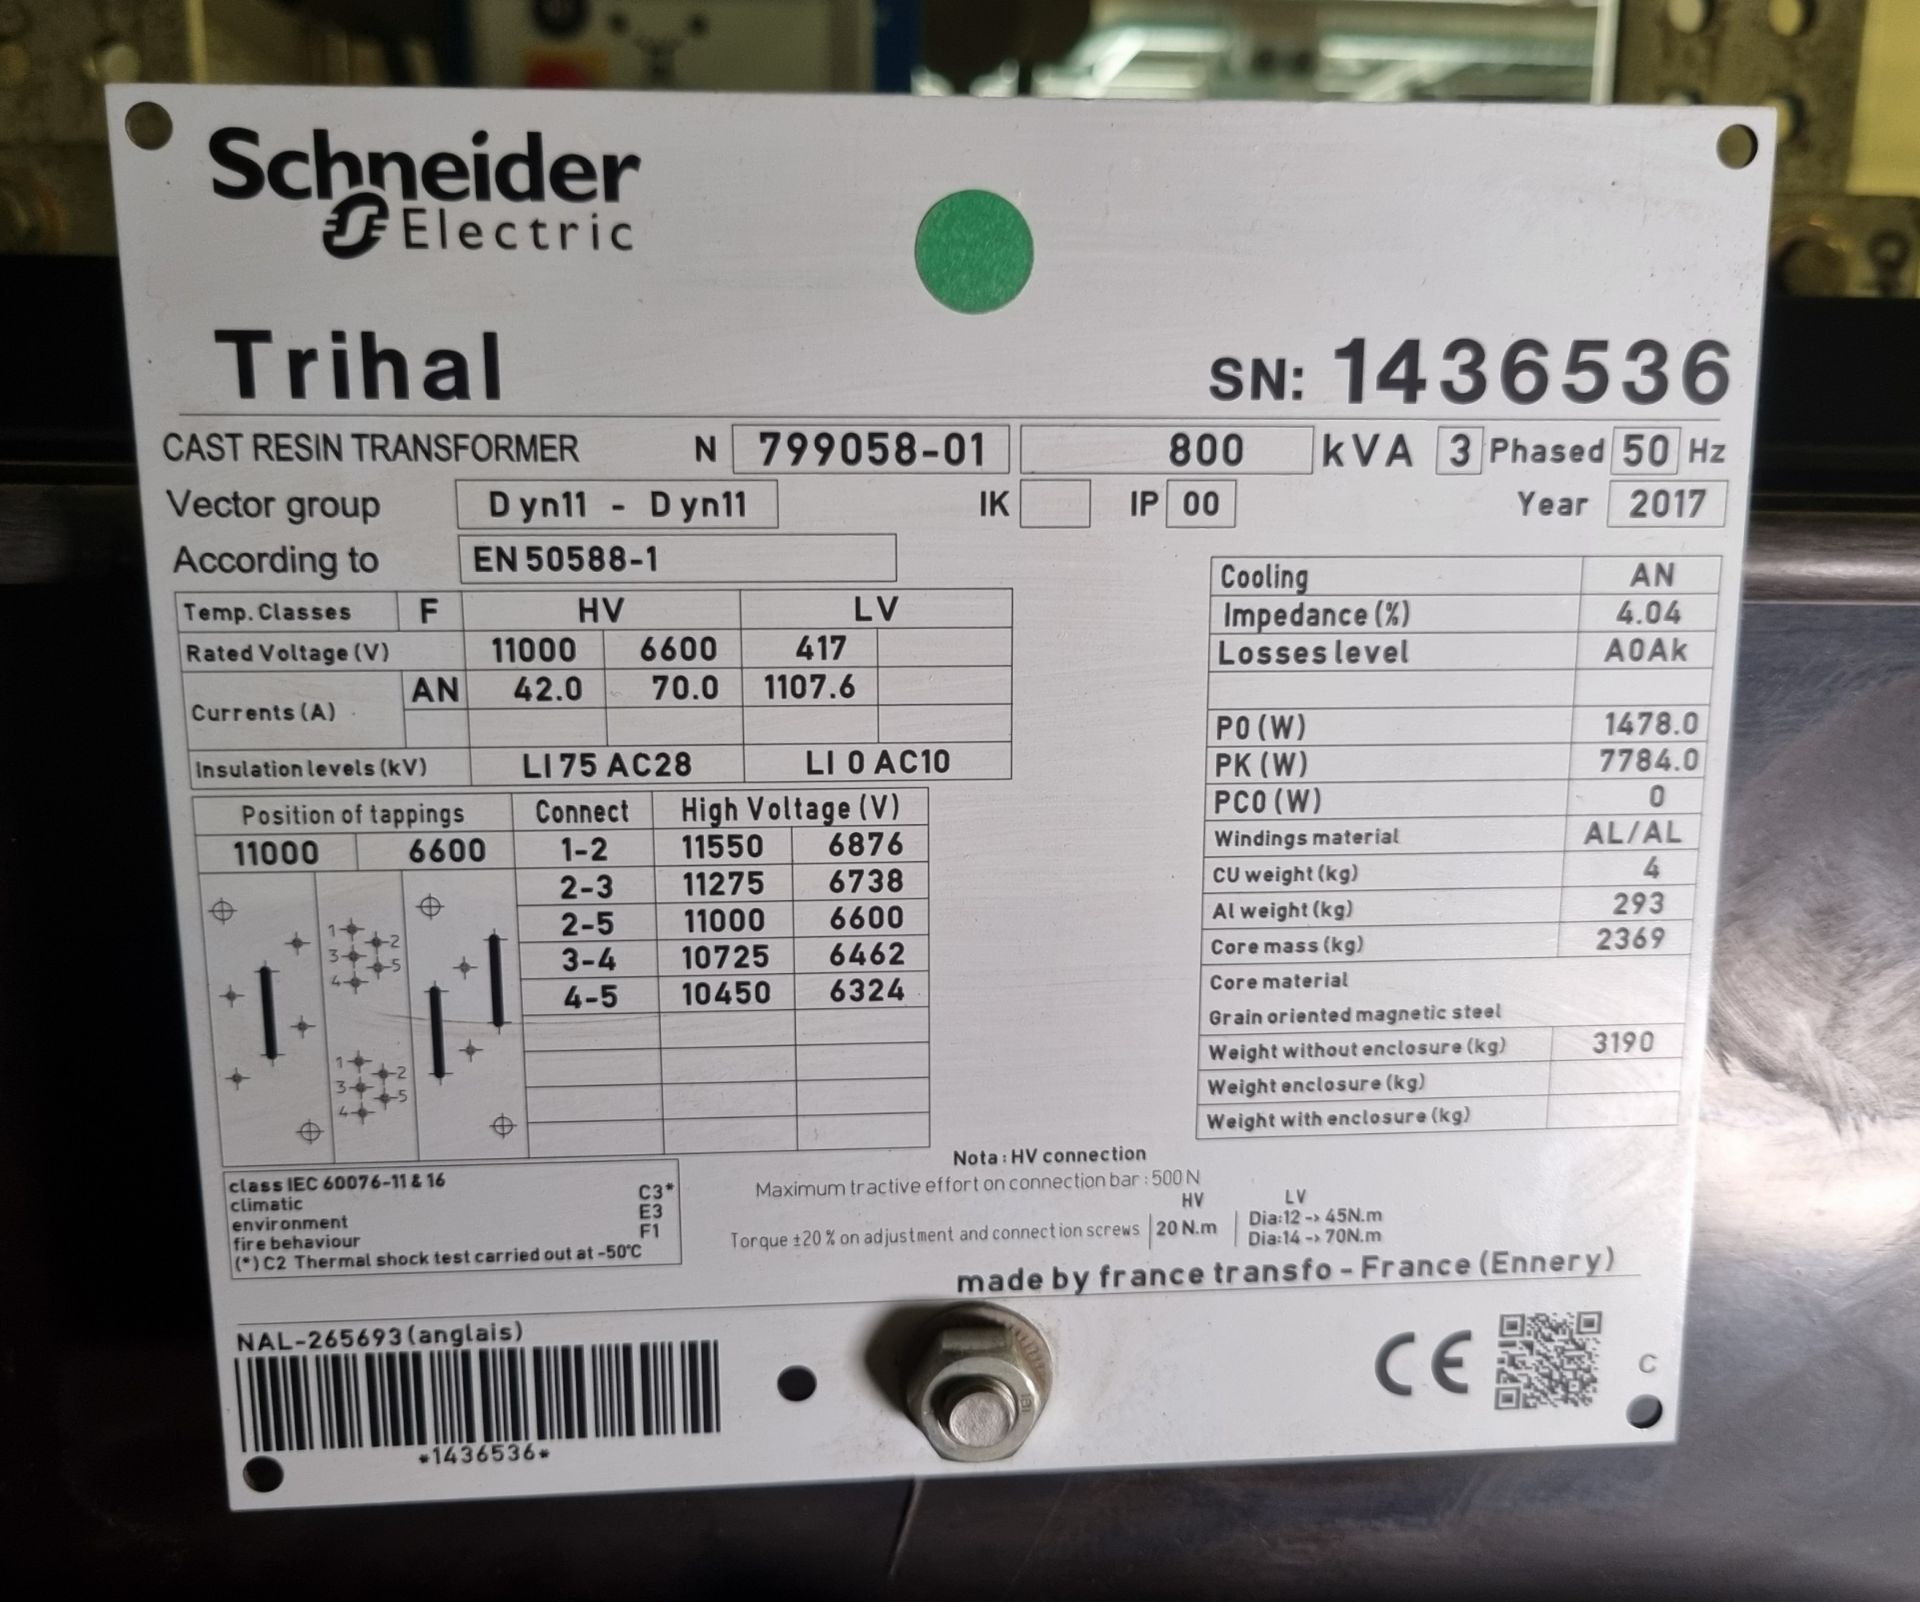 Schneider Electric Trihal cast resin transformer - 800kVA - 3 phase - 50Hz - Year: 2017 - unissued - Image 6 of 7